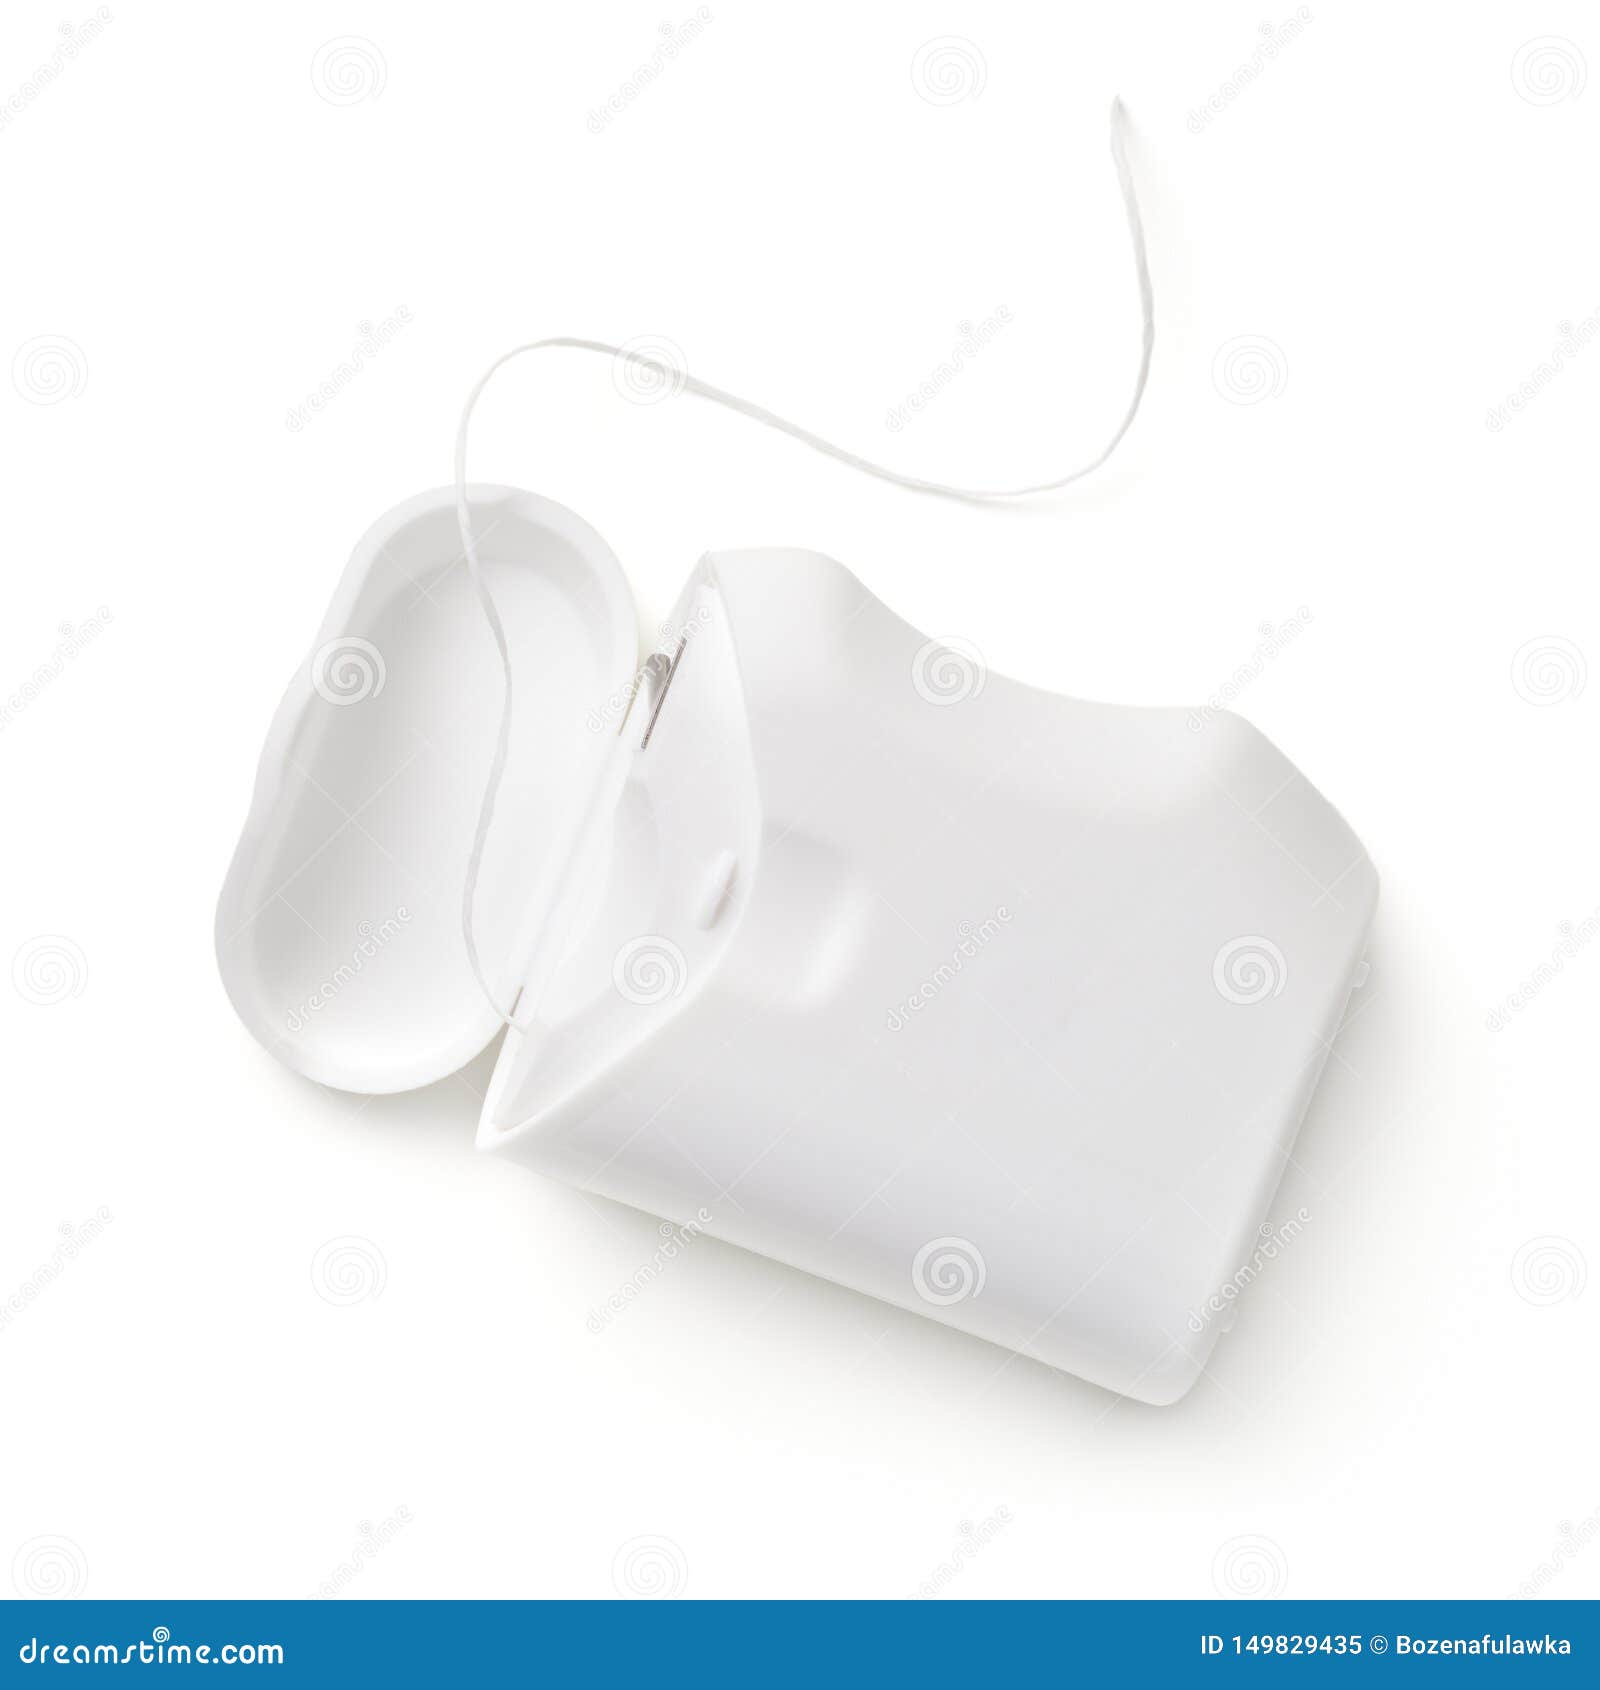 Dental Floss Container Isolated on White Background Stock Image - Image of  dentist, background: 149829435